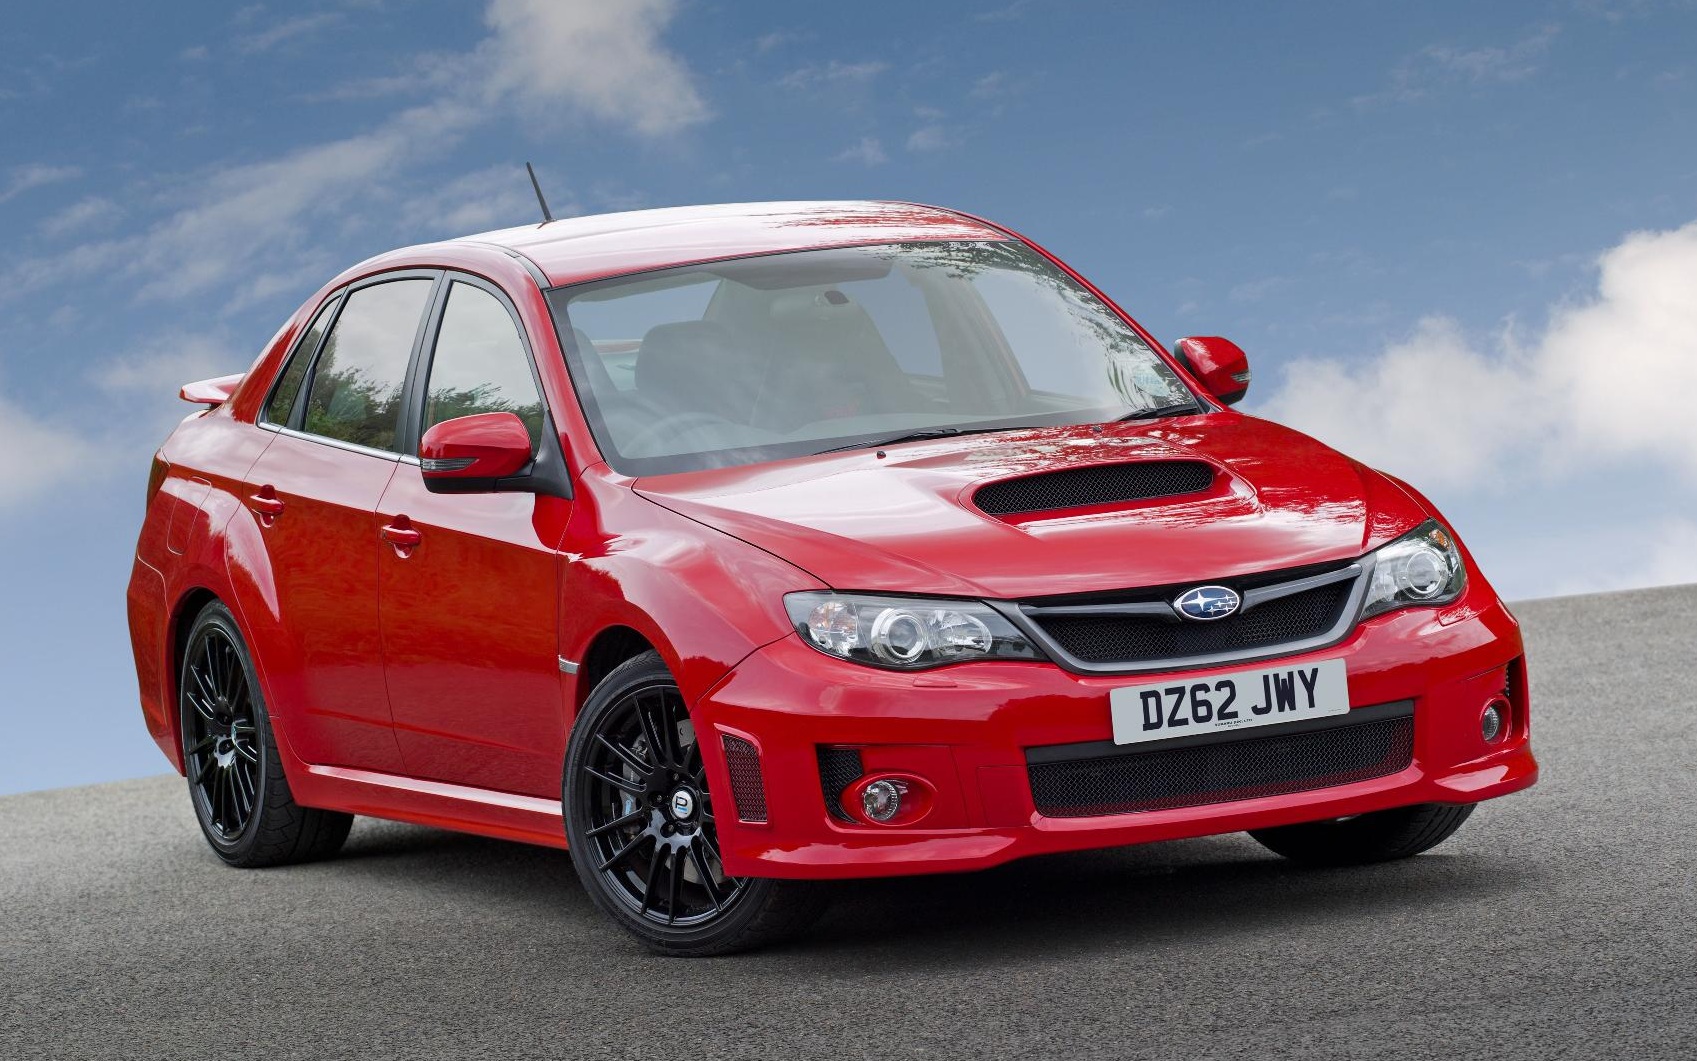 Subaru WRX STI Gets More Power And Lower Price For Late 2012